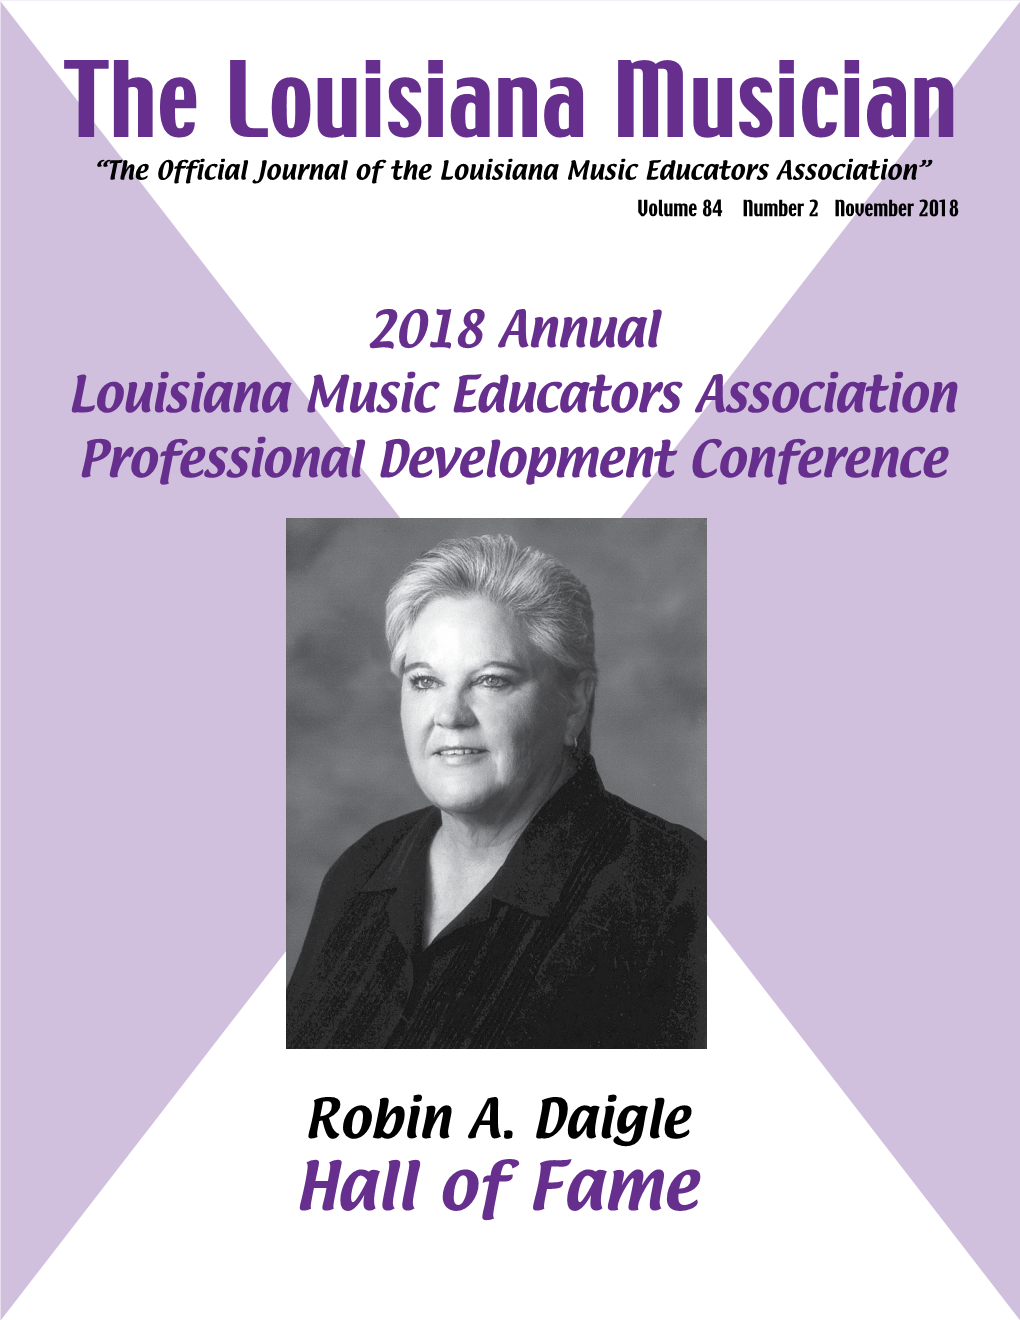 The Louisiana Musician “The Official Journal of the Louisiana Music Educators Association” Volume 84 Number 2 November 2018